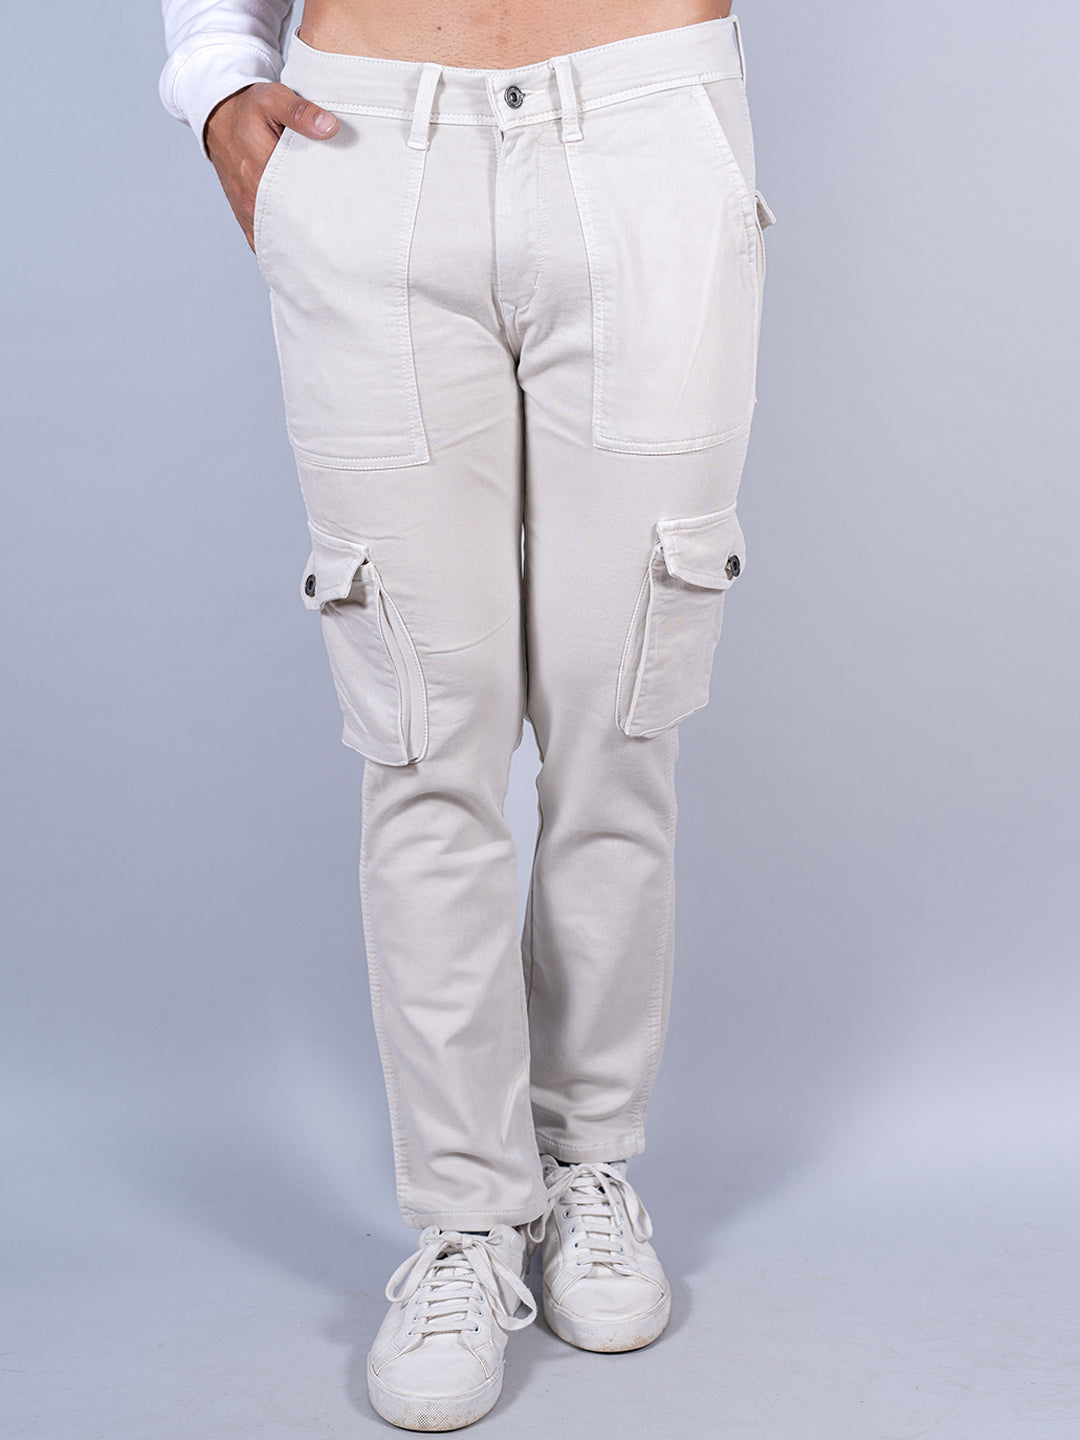 Juebong Men Cargo Pants with Multi-Pocket Cargo Men's Relaxed Pants Trousers  Drawstring Solid Cargo Pants Big & Tall,Beige,M - Walmart.com